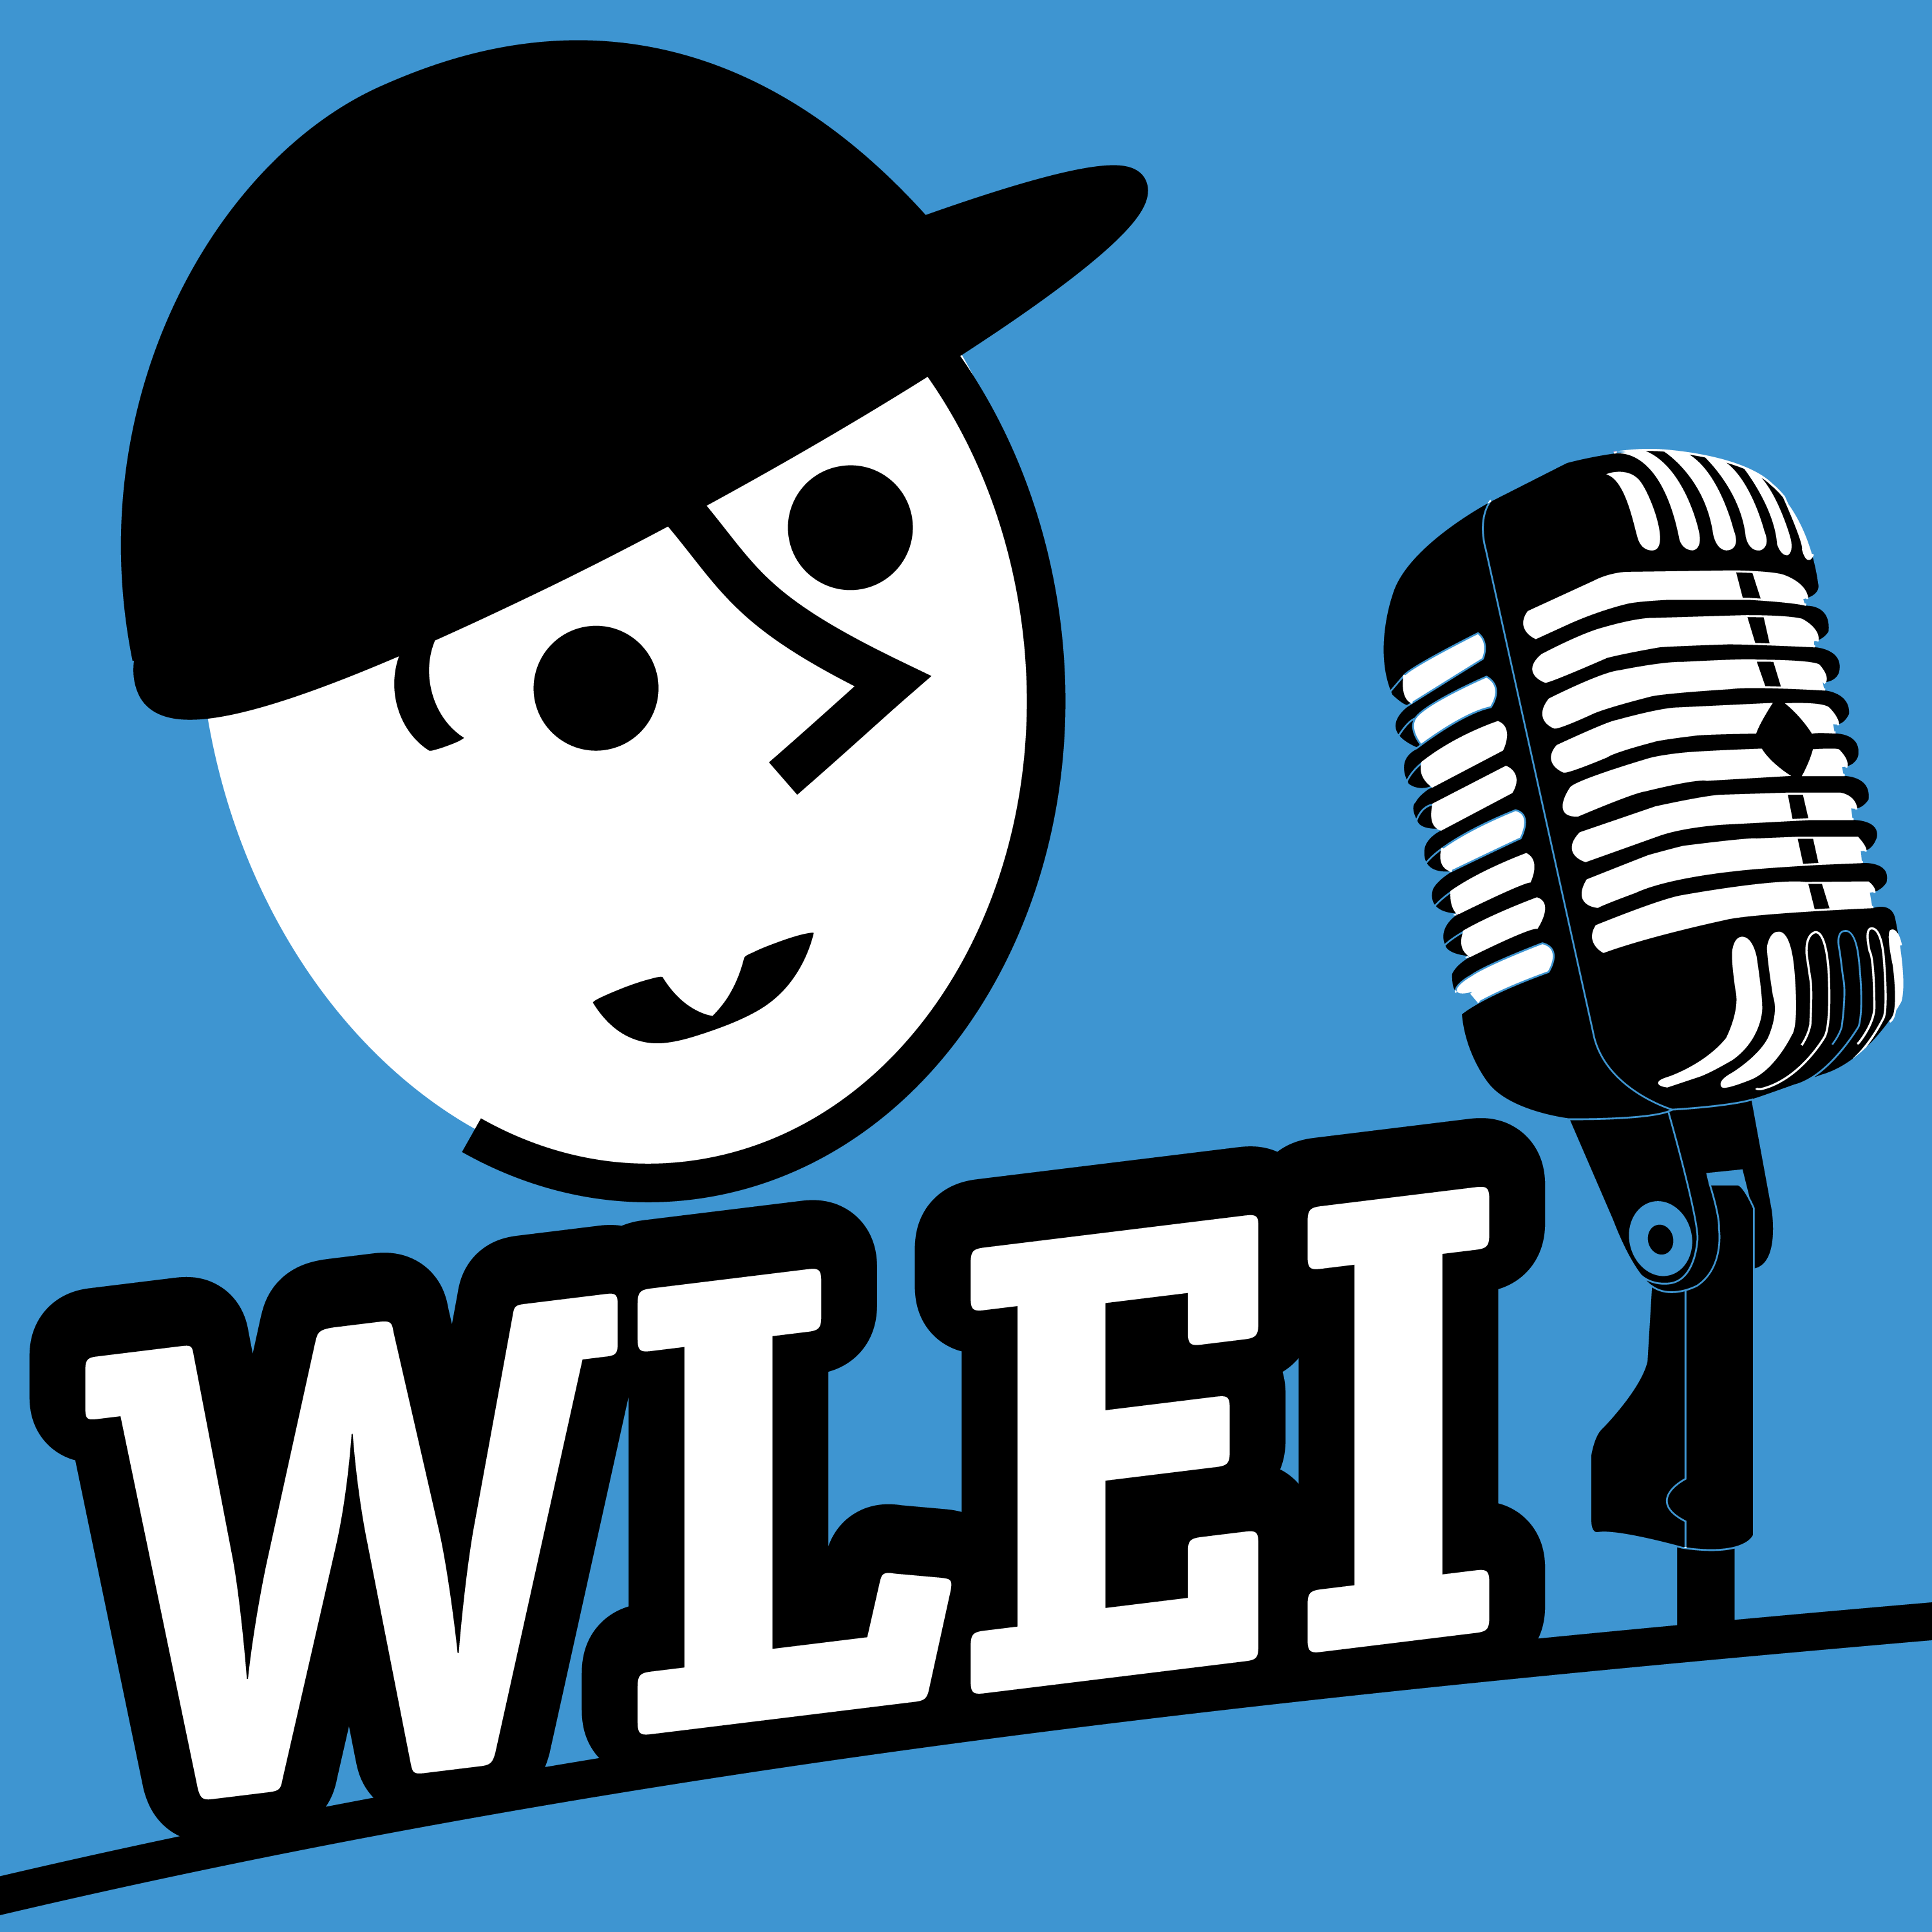 Guests on the WLEI podcast explain how lean practice and innovation are making things better.